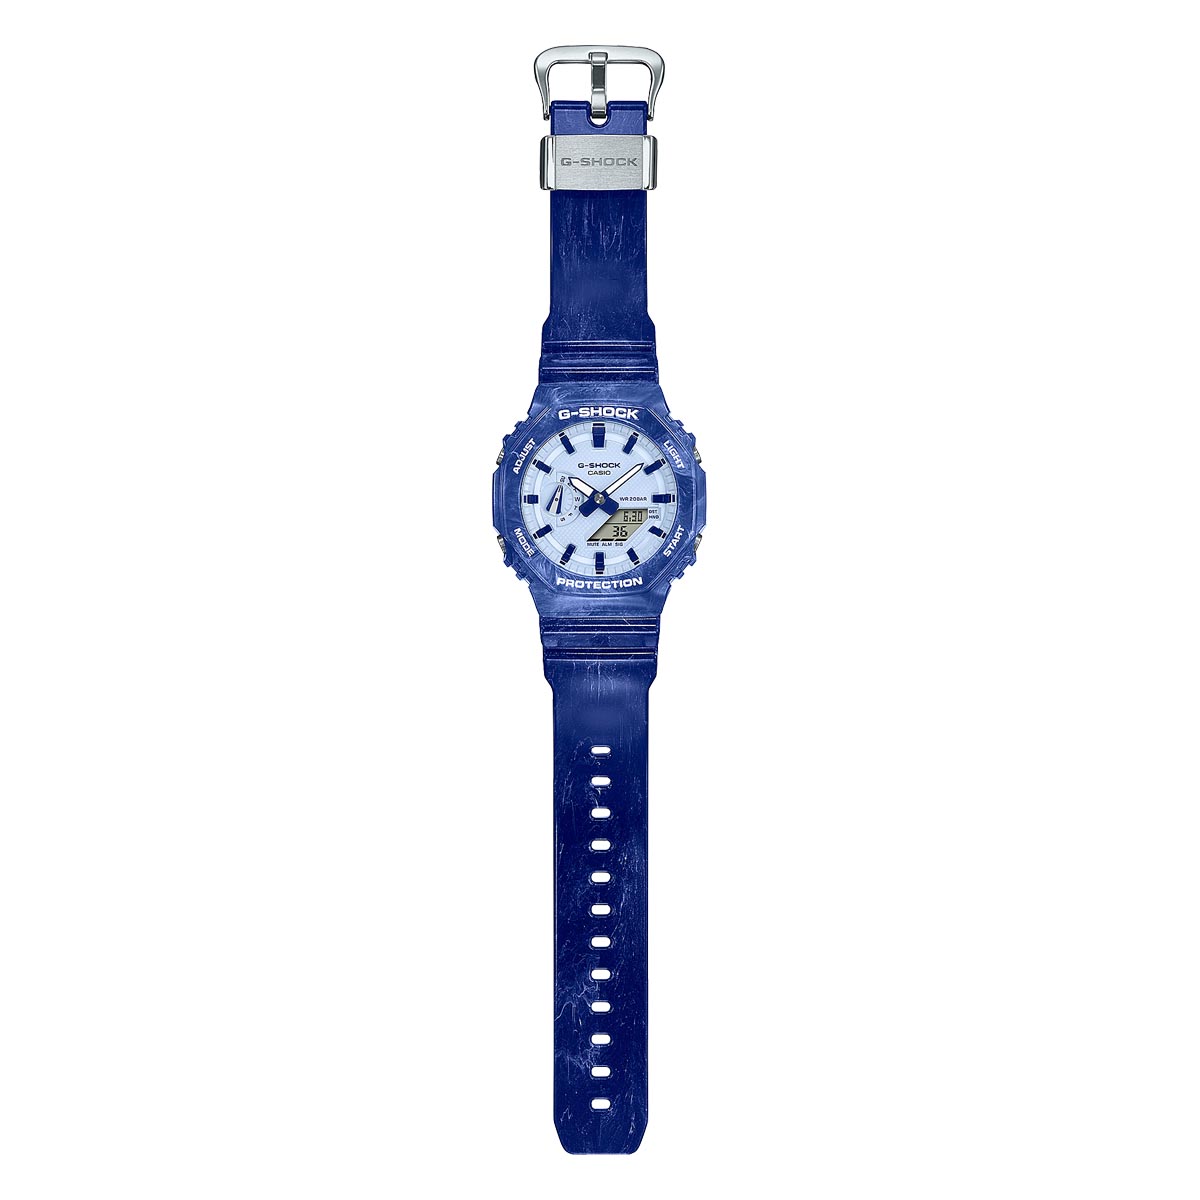 Gshock Mens Watch with White Dial and Blue Resin Band (quartz movement)